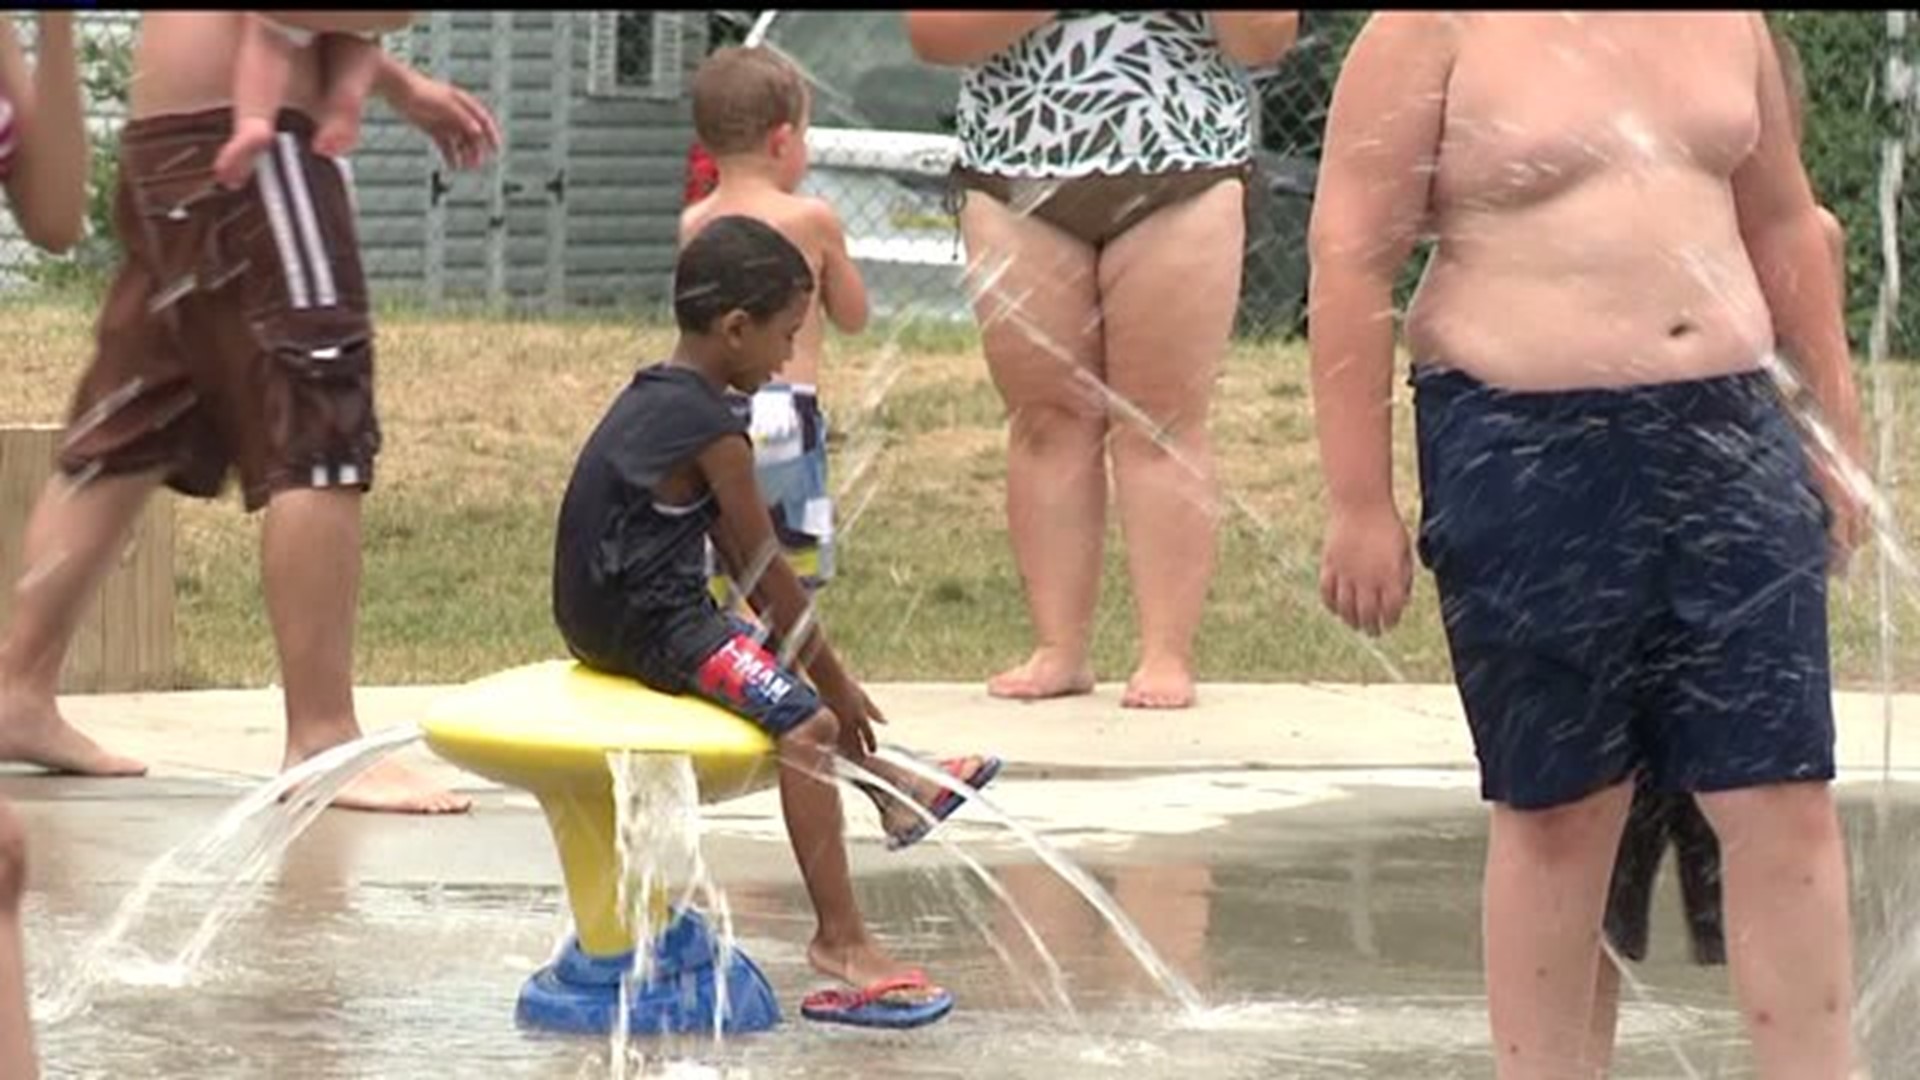 Keeping cool at the Red Lion Splash Pad